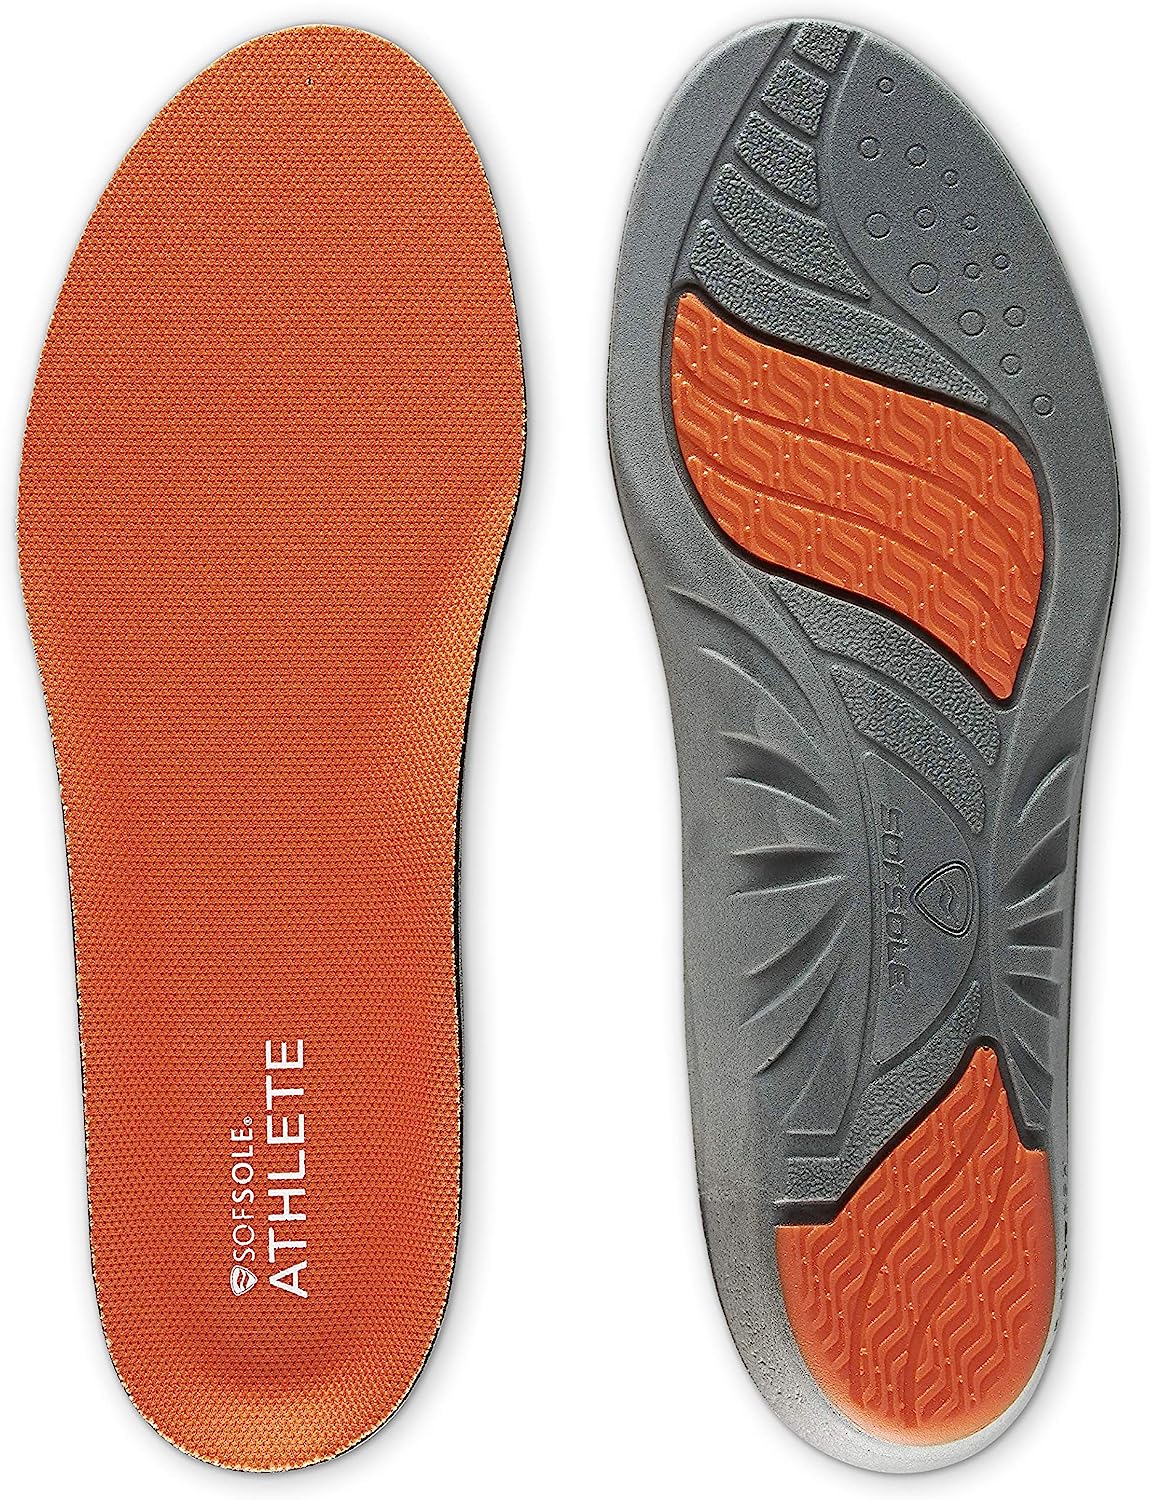 Sof Sole Insoles Men's ATHLETE Performance Full-Length [...]